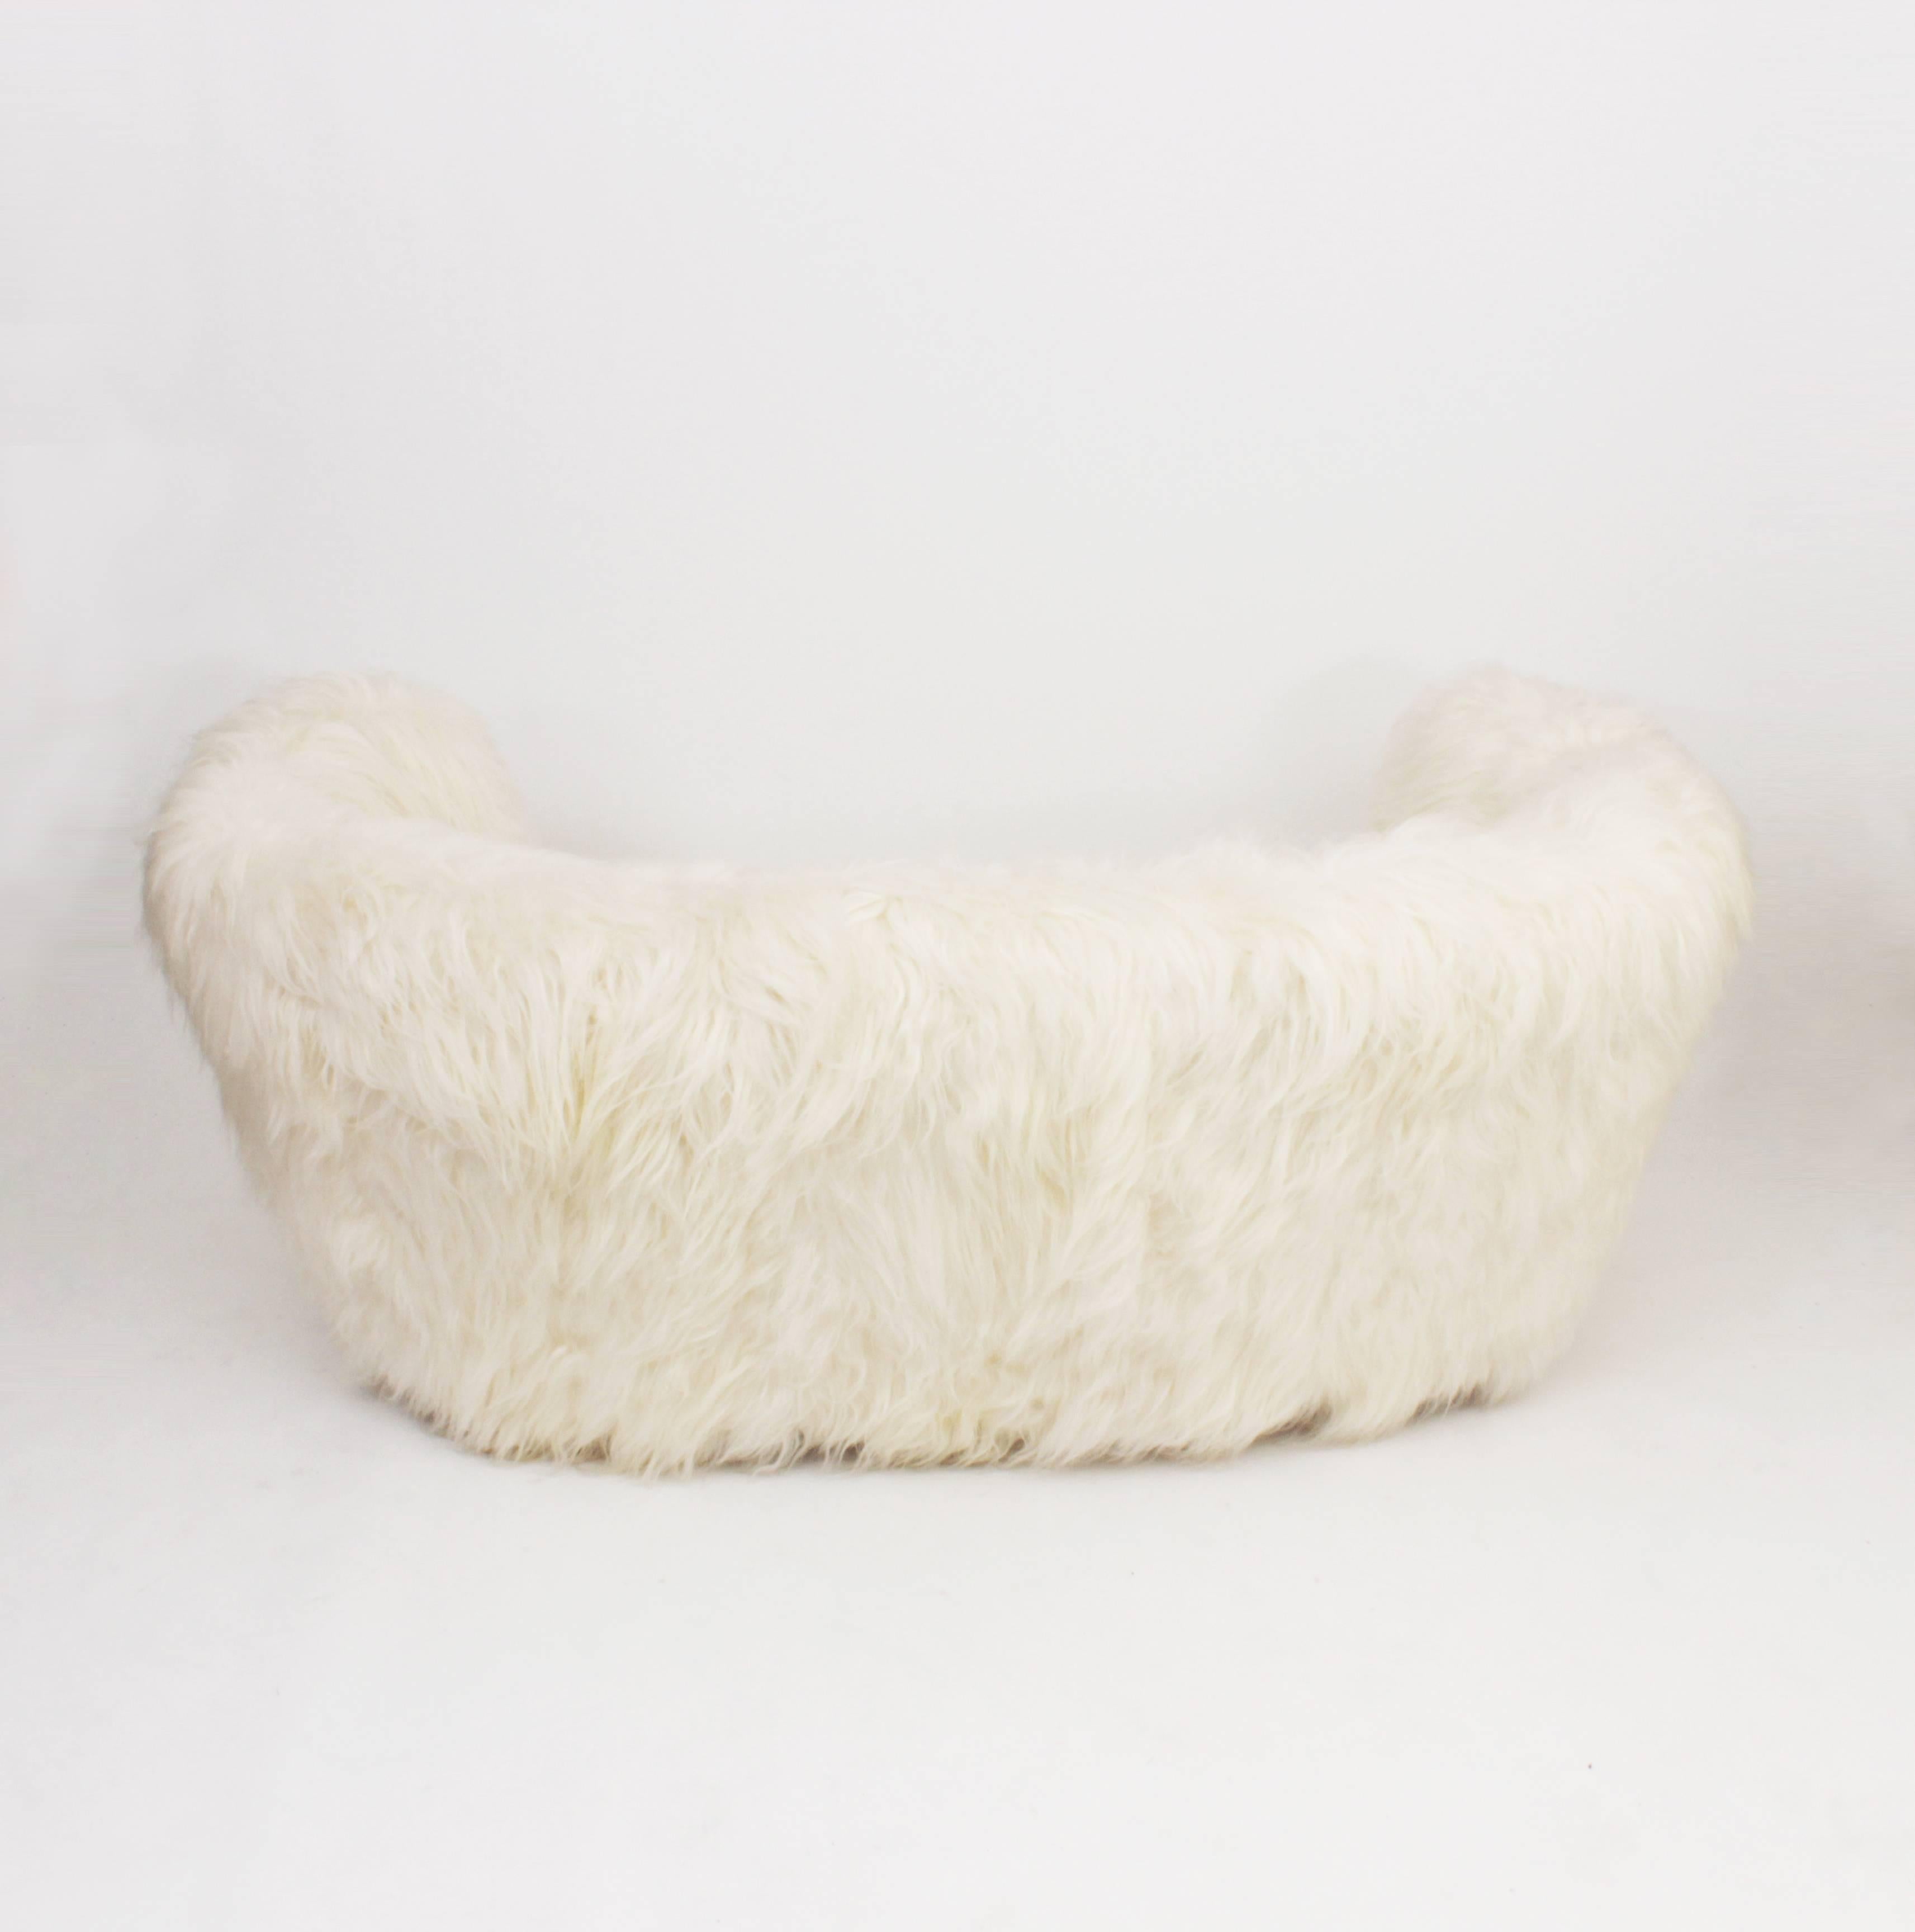 Mid-20th Century Three-Seat Curved Sofa by Slagelse, in White Sheepskin Denmark, circa 1940 For Sale